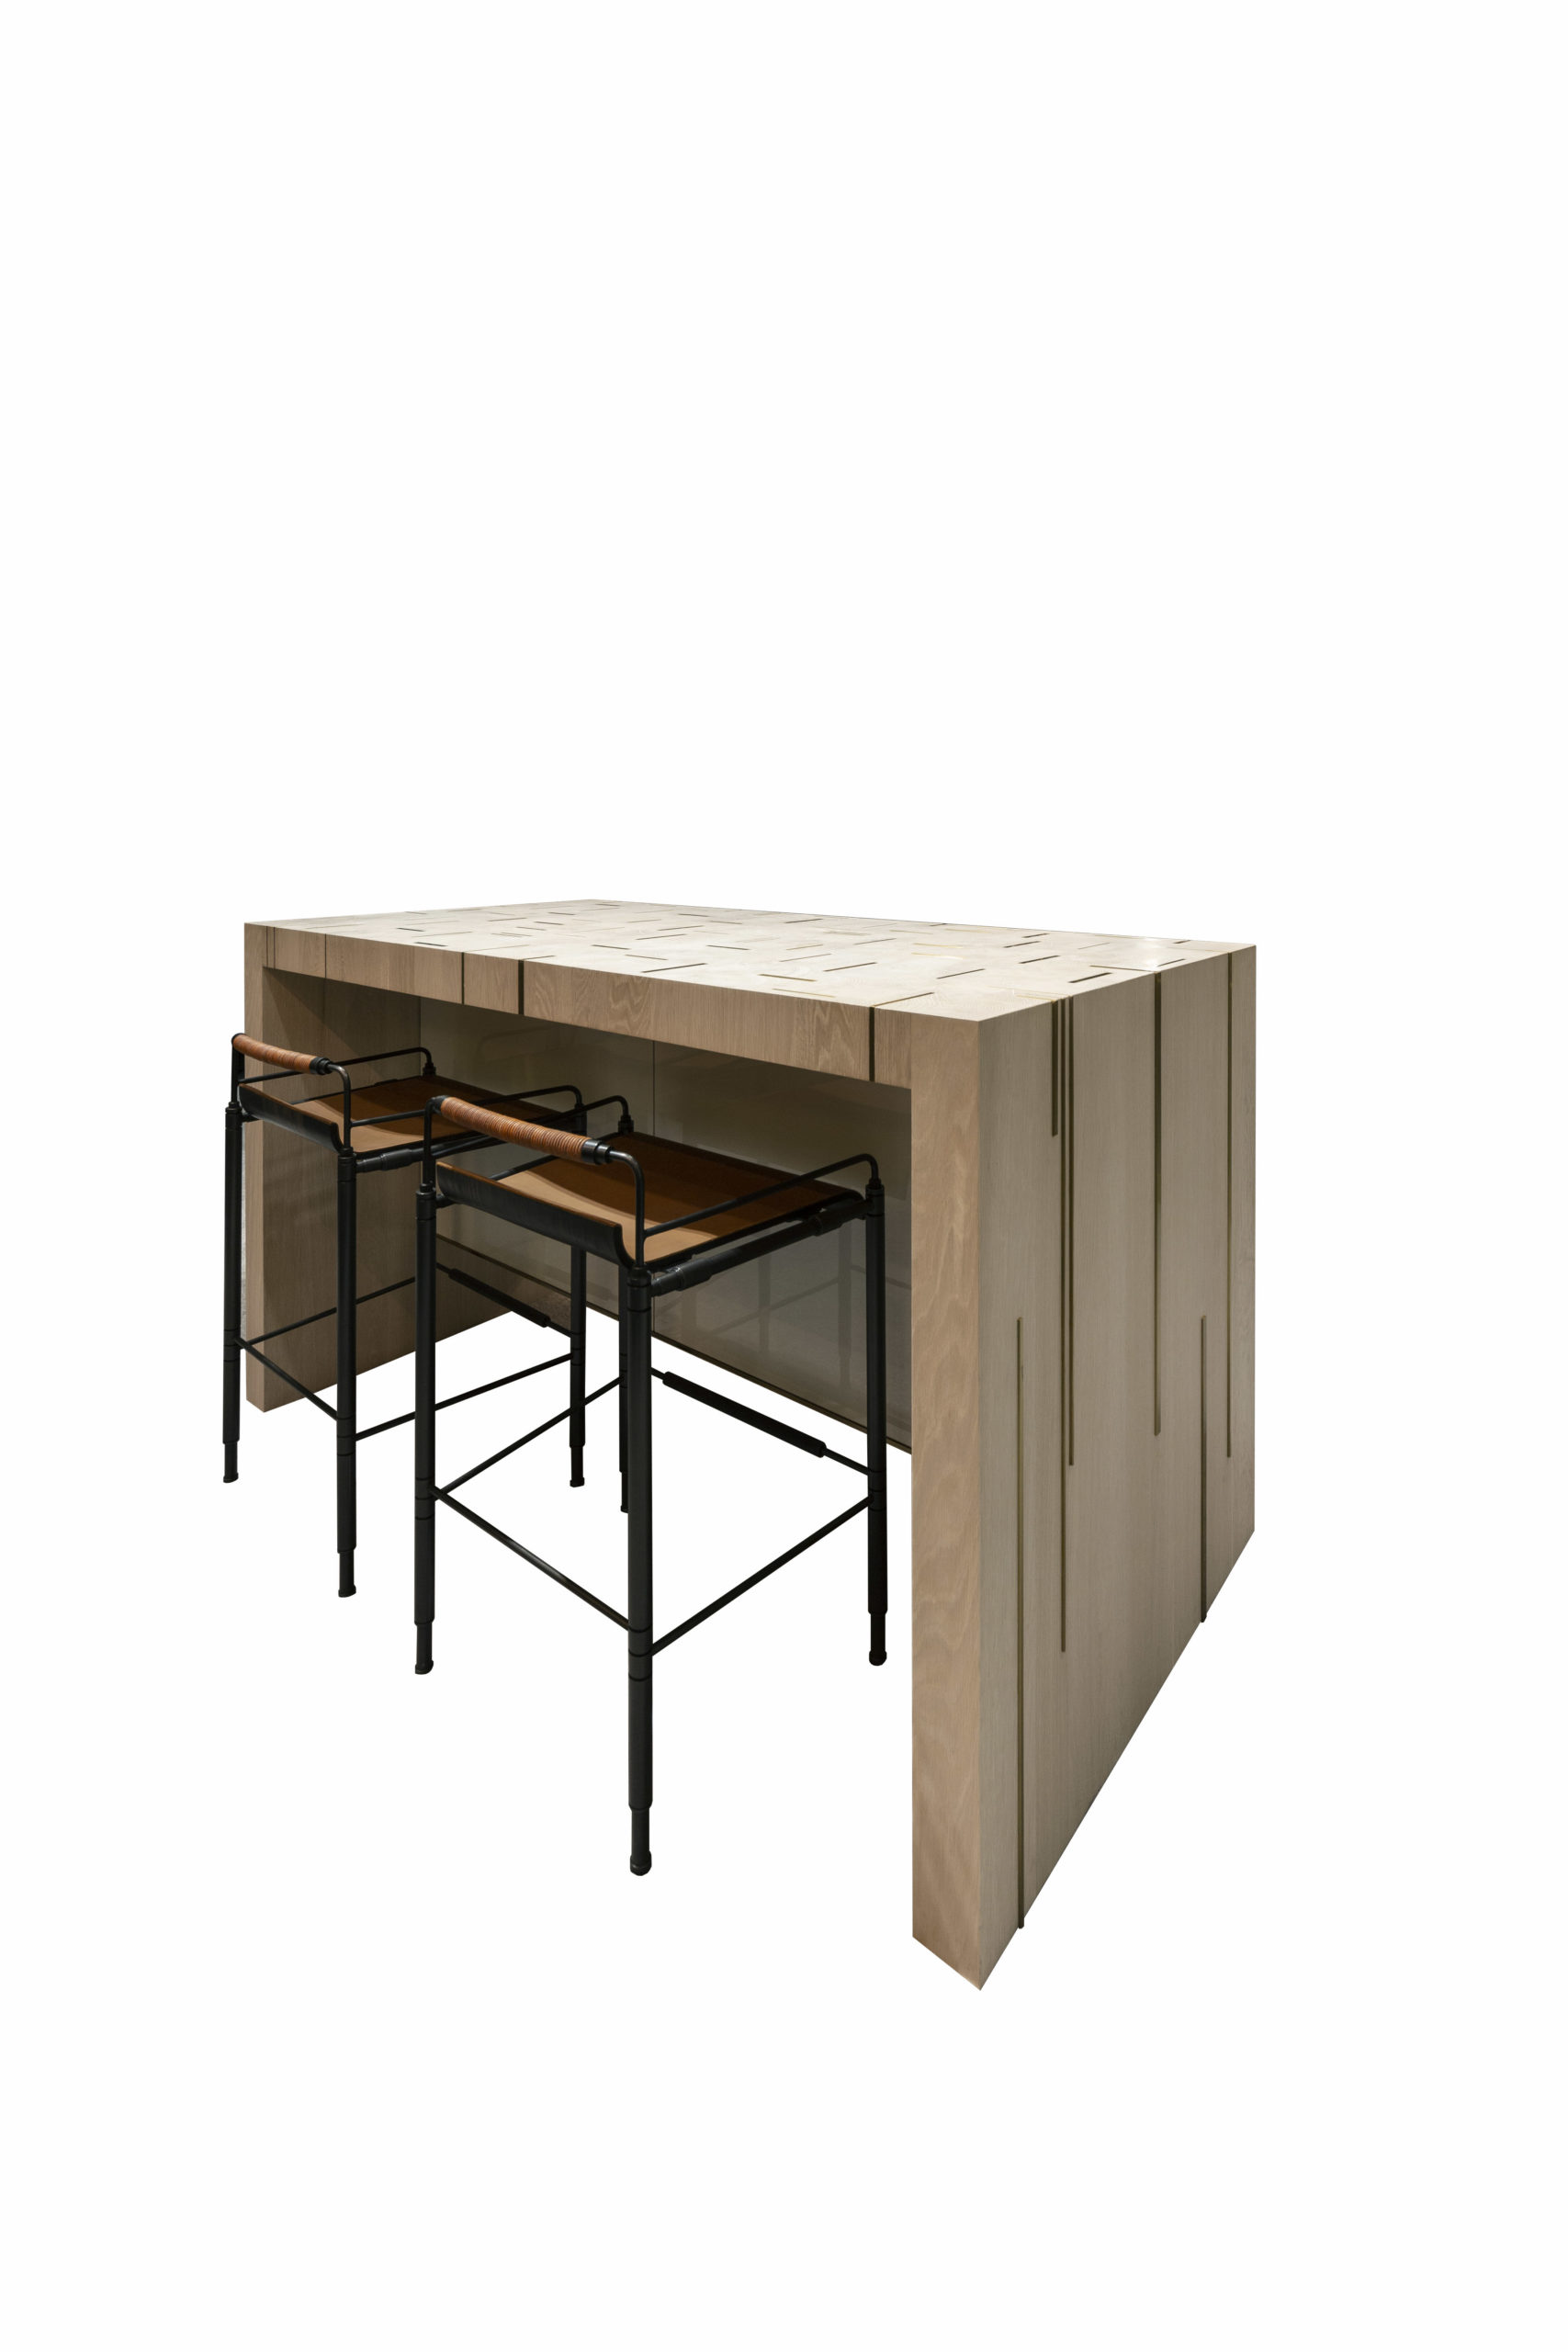 amuneal_products_WNWN_NYDC_1Inlay-Island-with-chairs-whited-out-icff_2019_0184-scaled-1